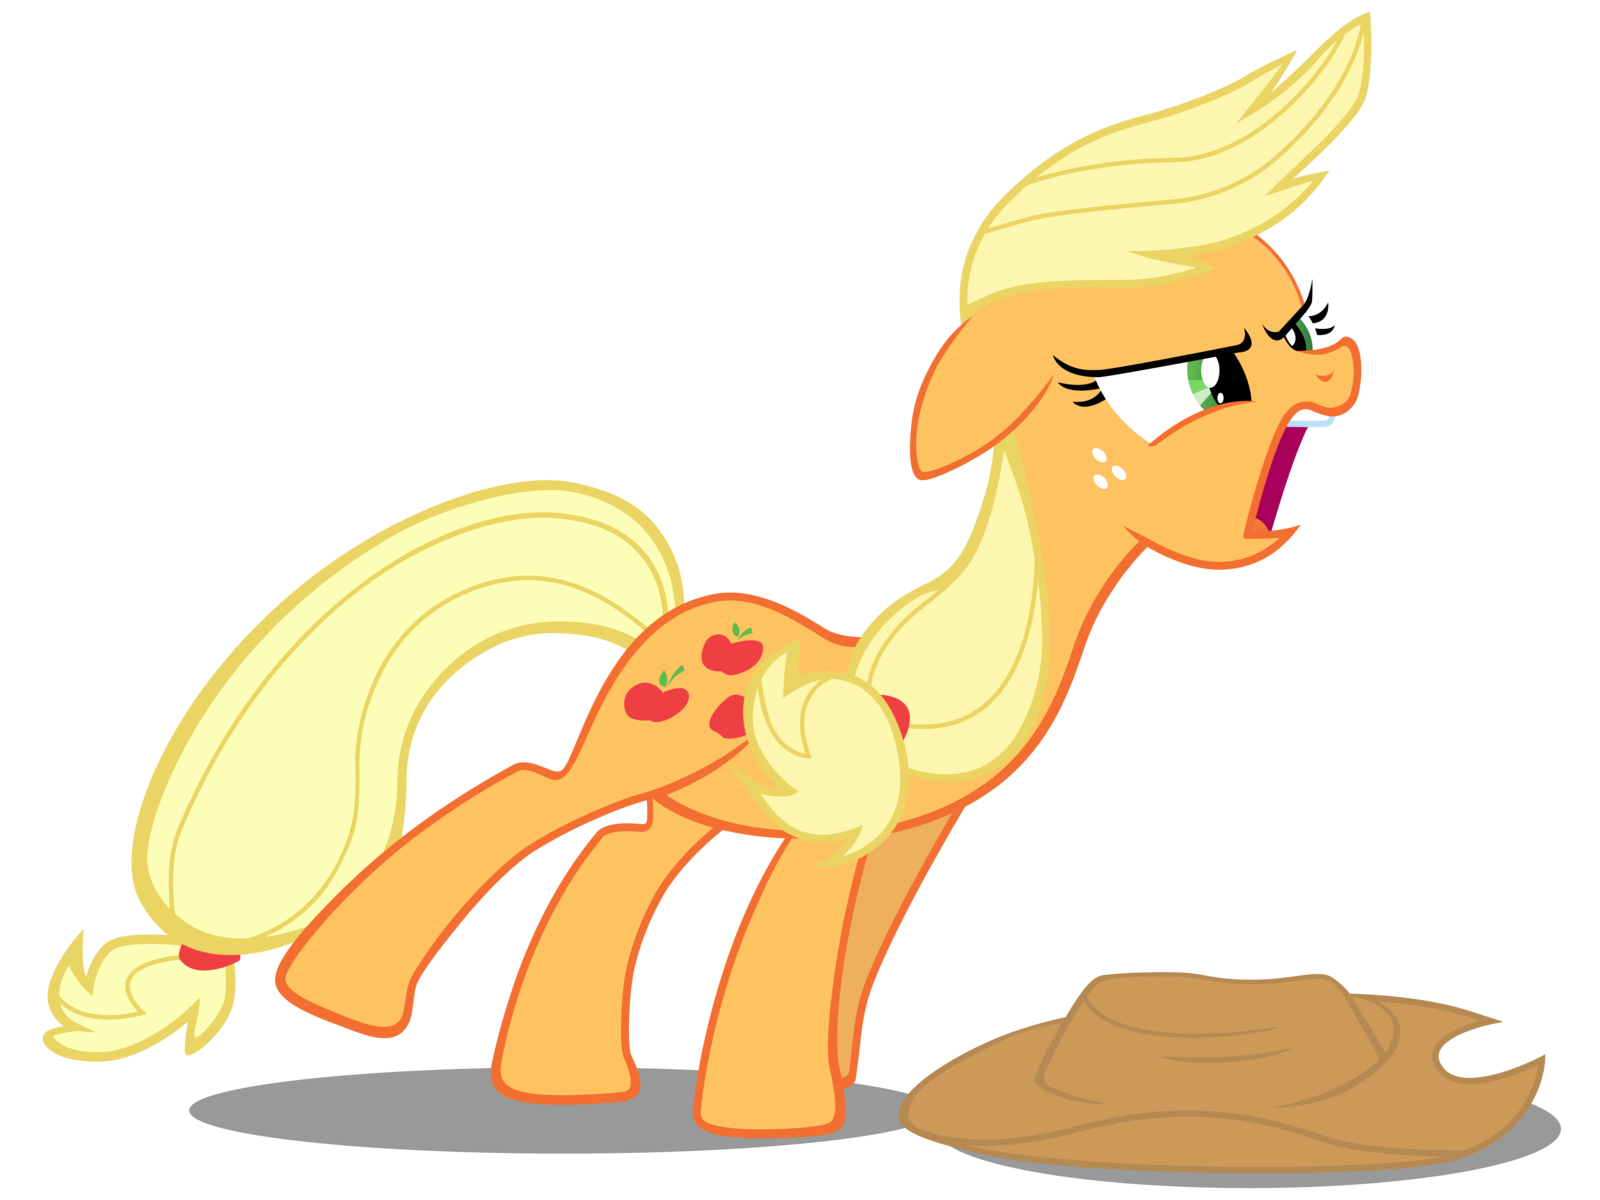 applejack___screaming_and_yelling_by_cal